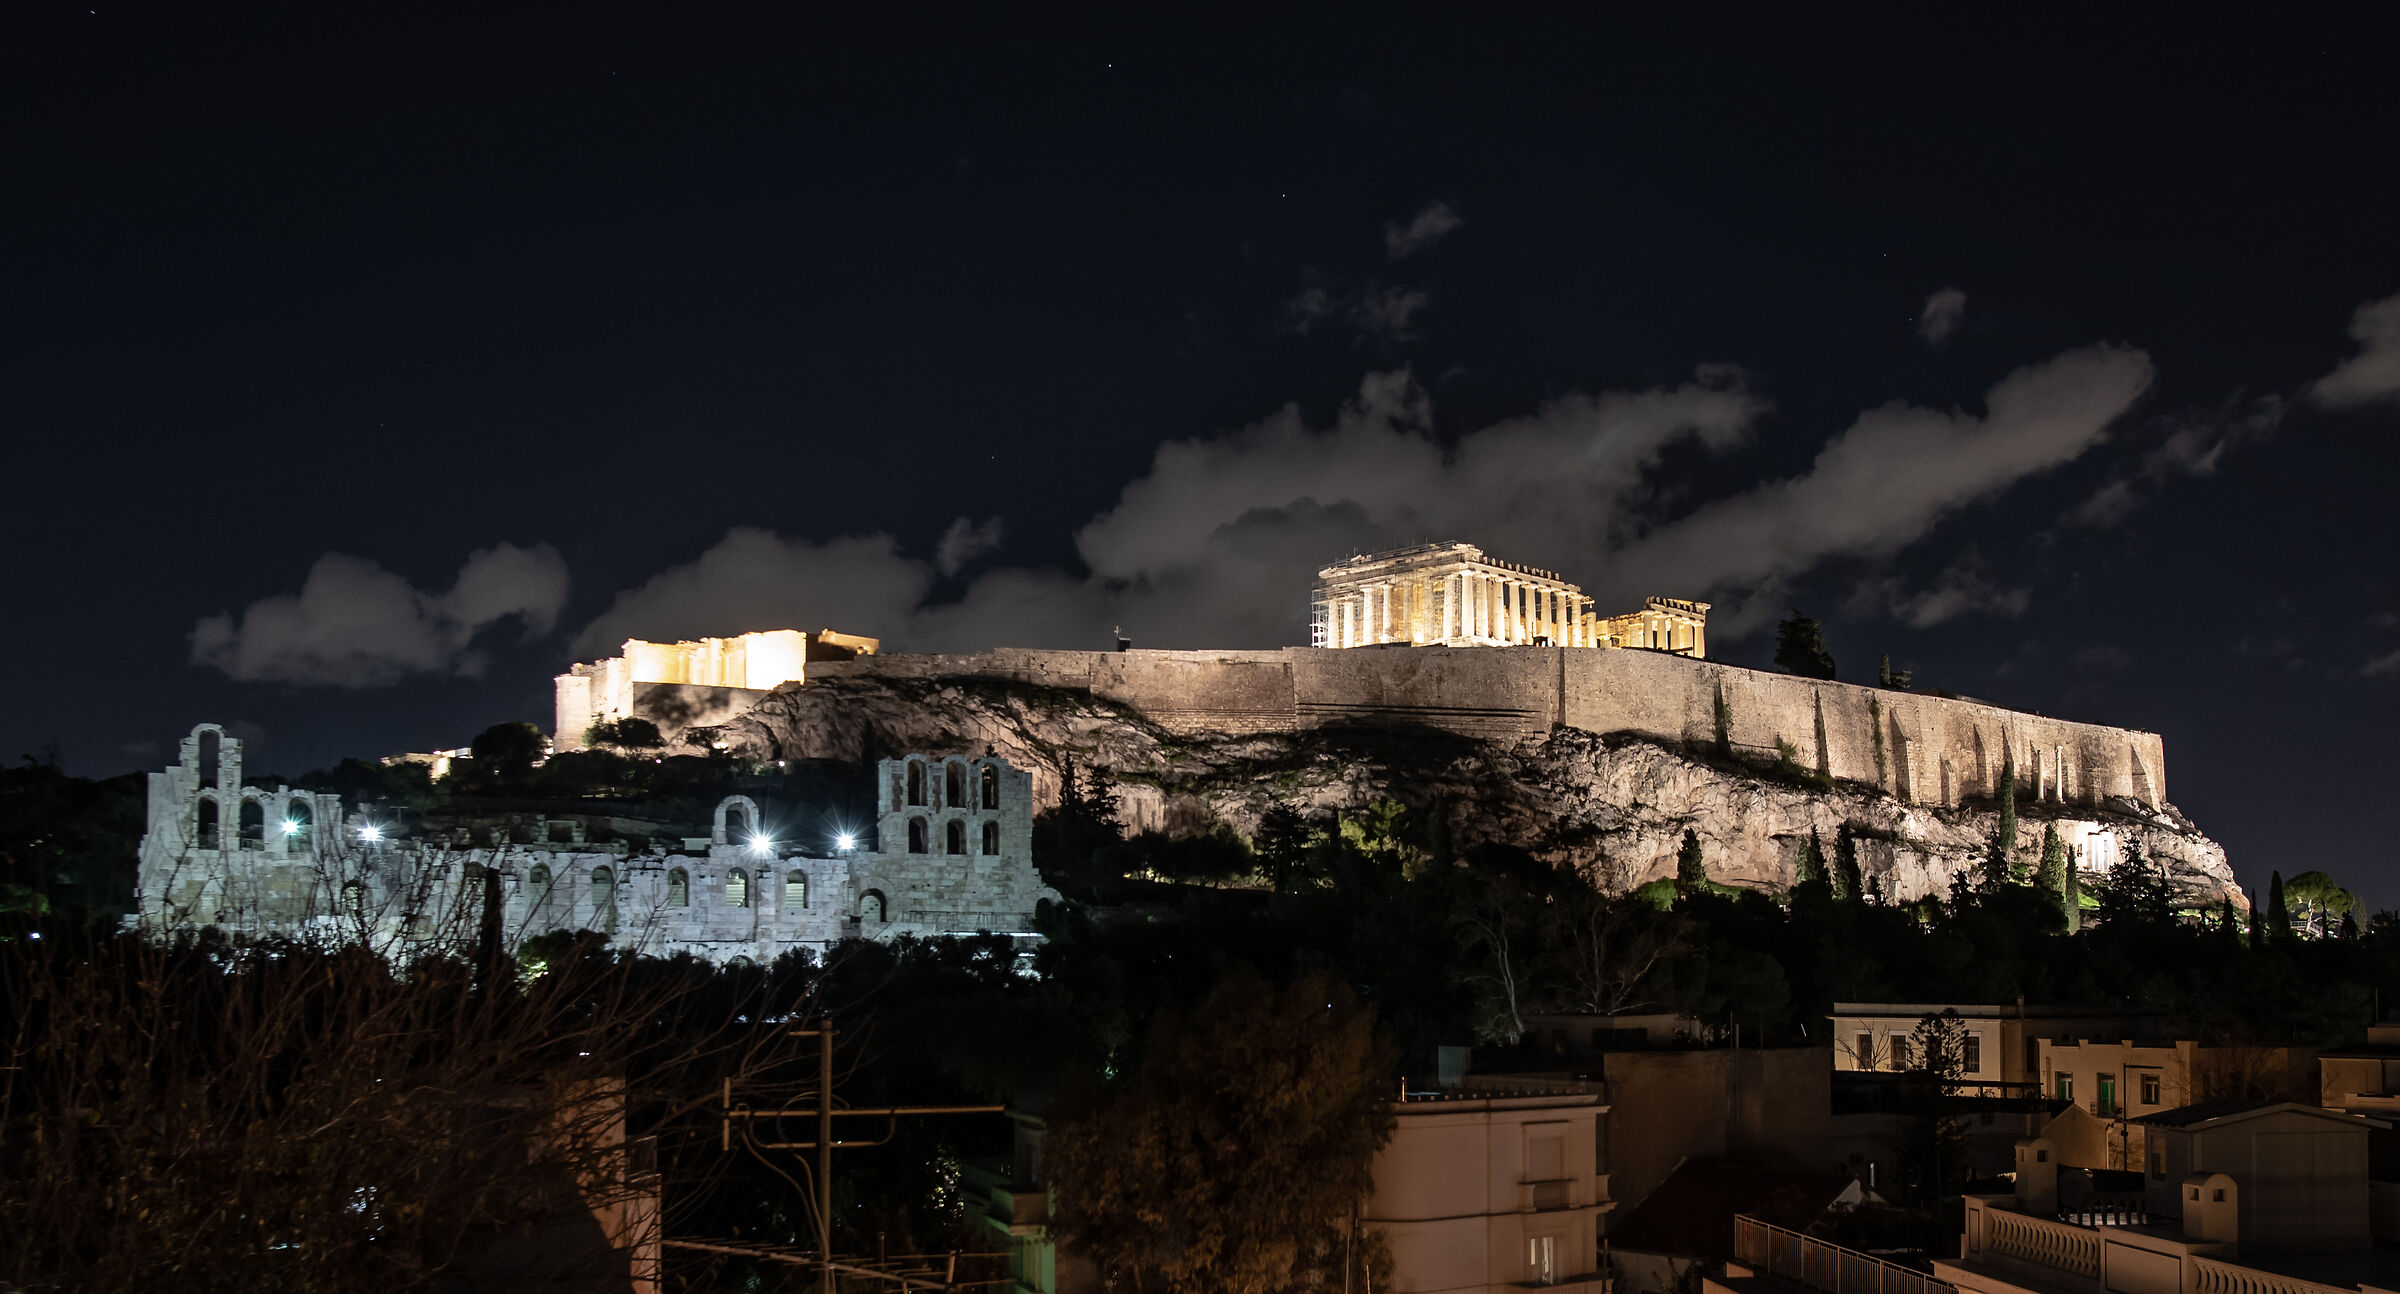 acropolis by night...